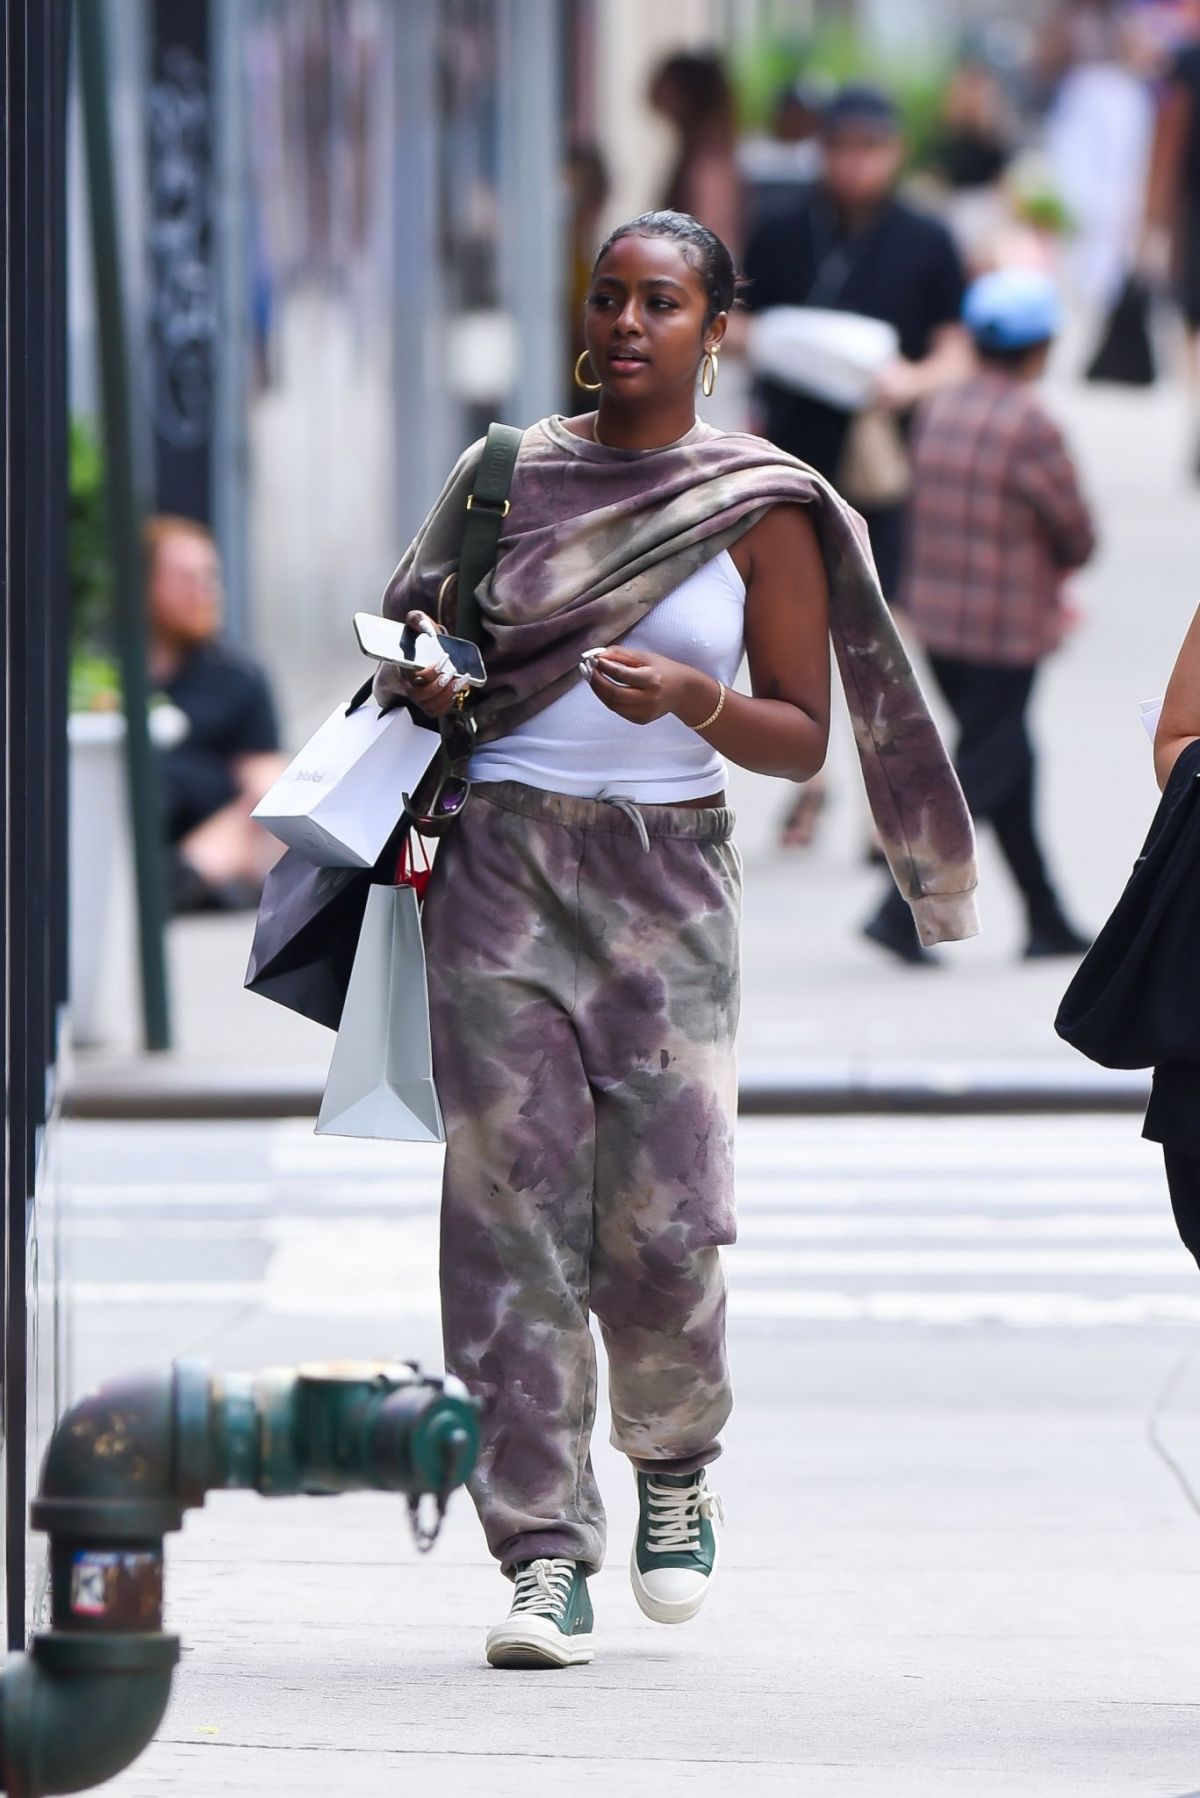 JUSTINE SKYE Out Shopping in New York 08/17/2022 – HawtCelebs